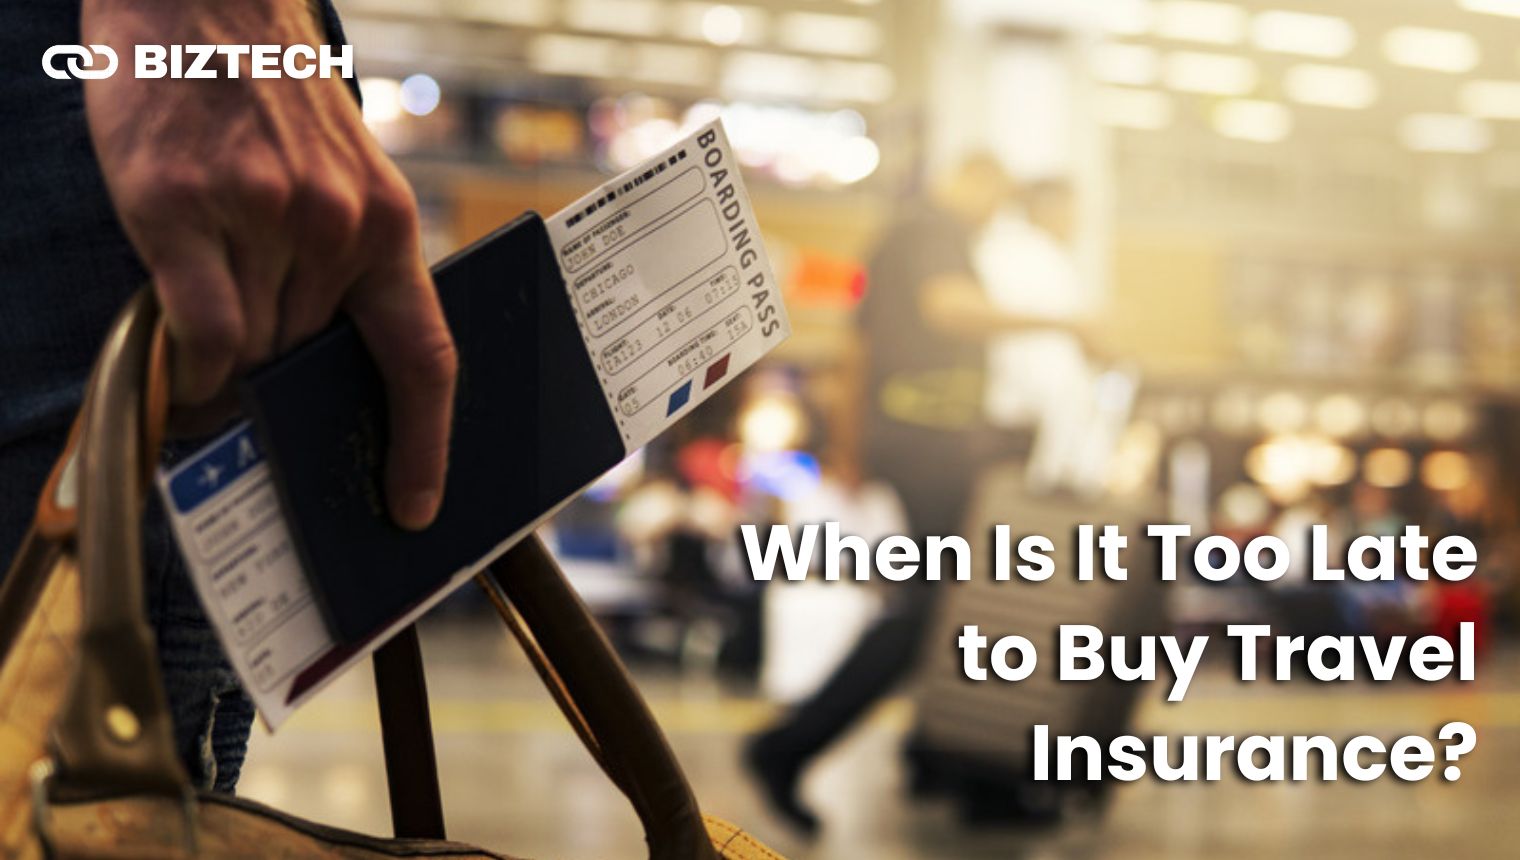 When Is It Too Late to Buy Travel Insurance?